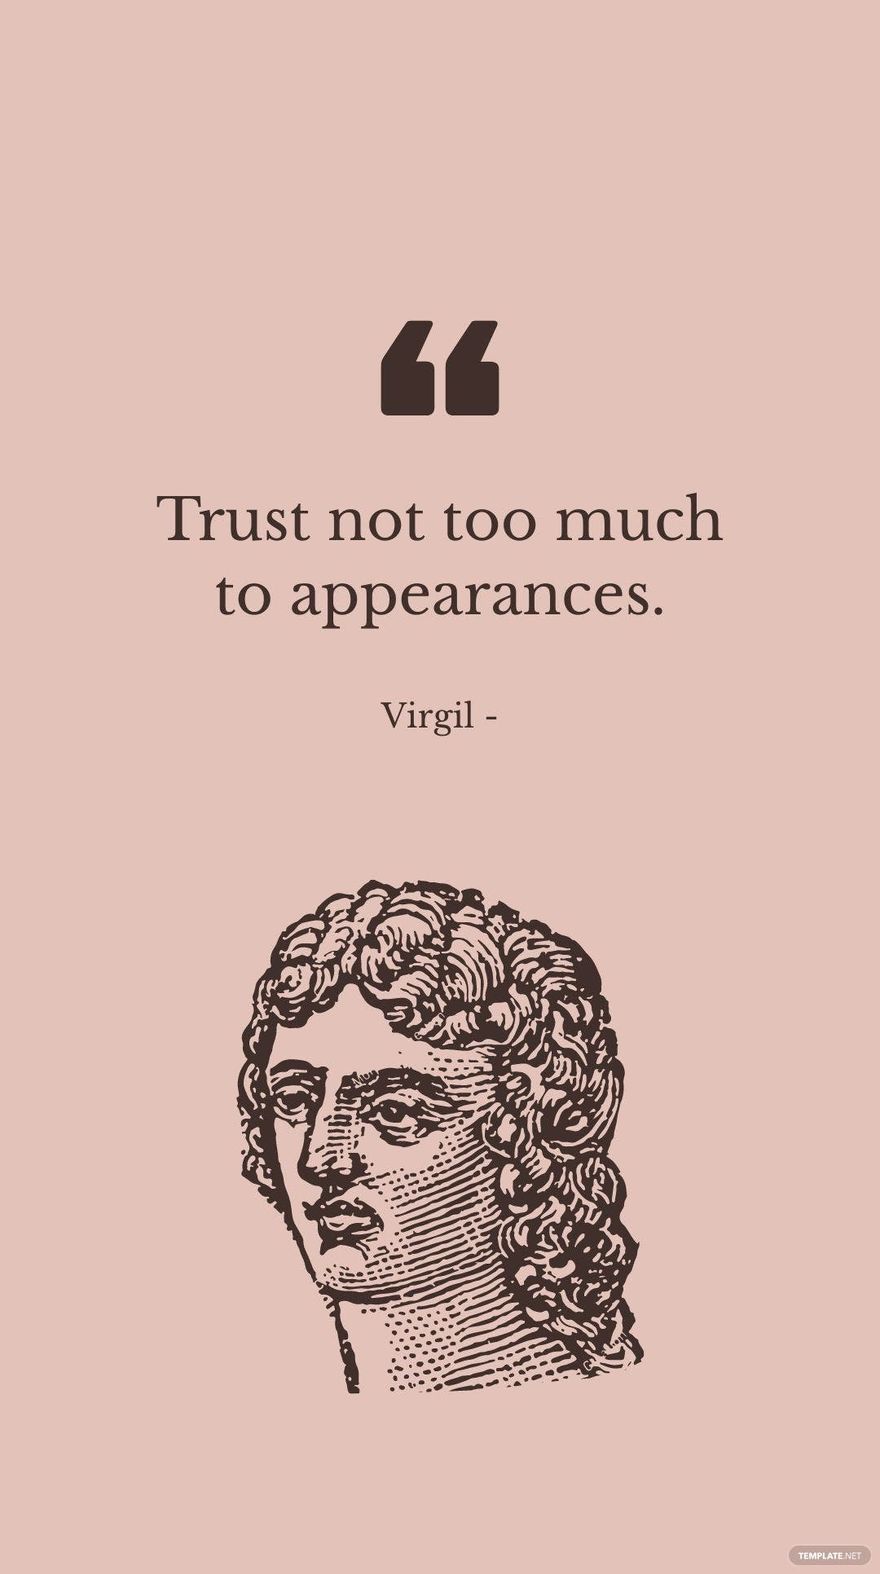 Free Virgil - Trust not too much to appearances. in JPG